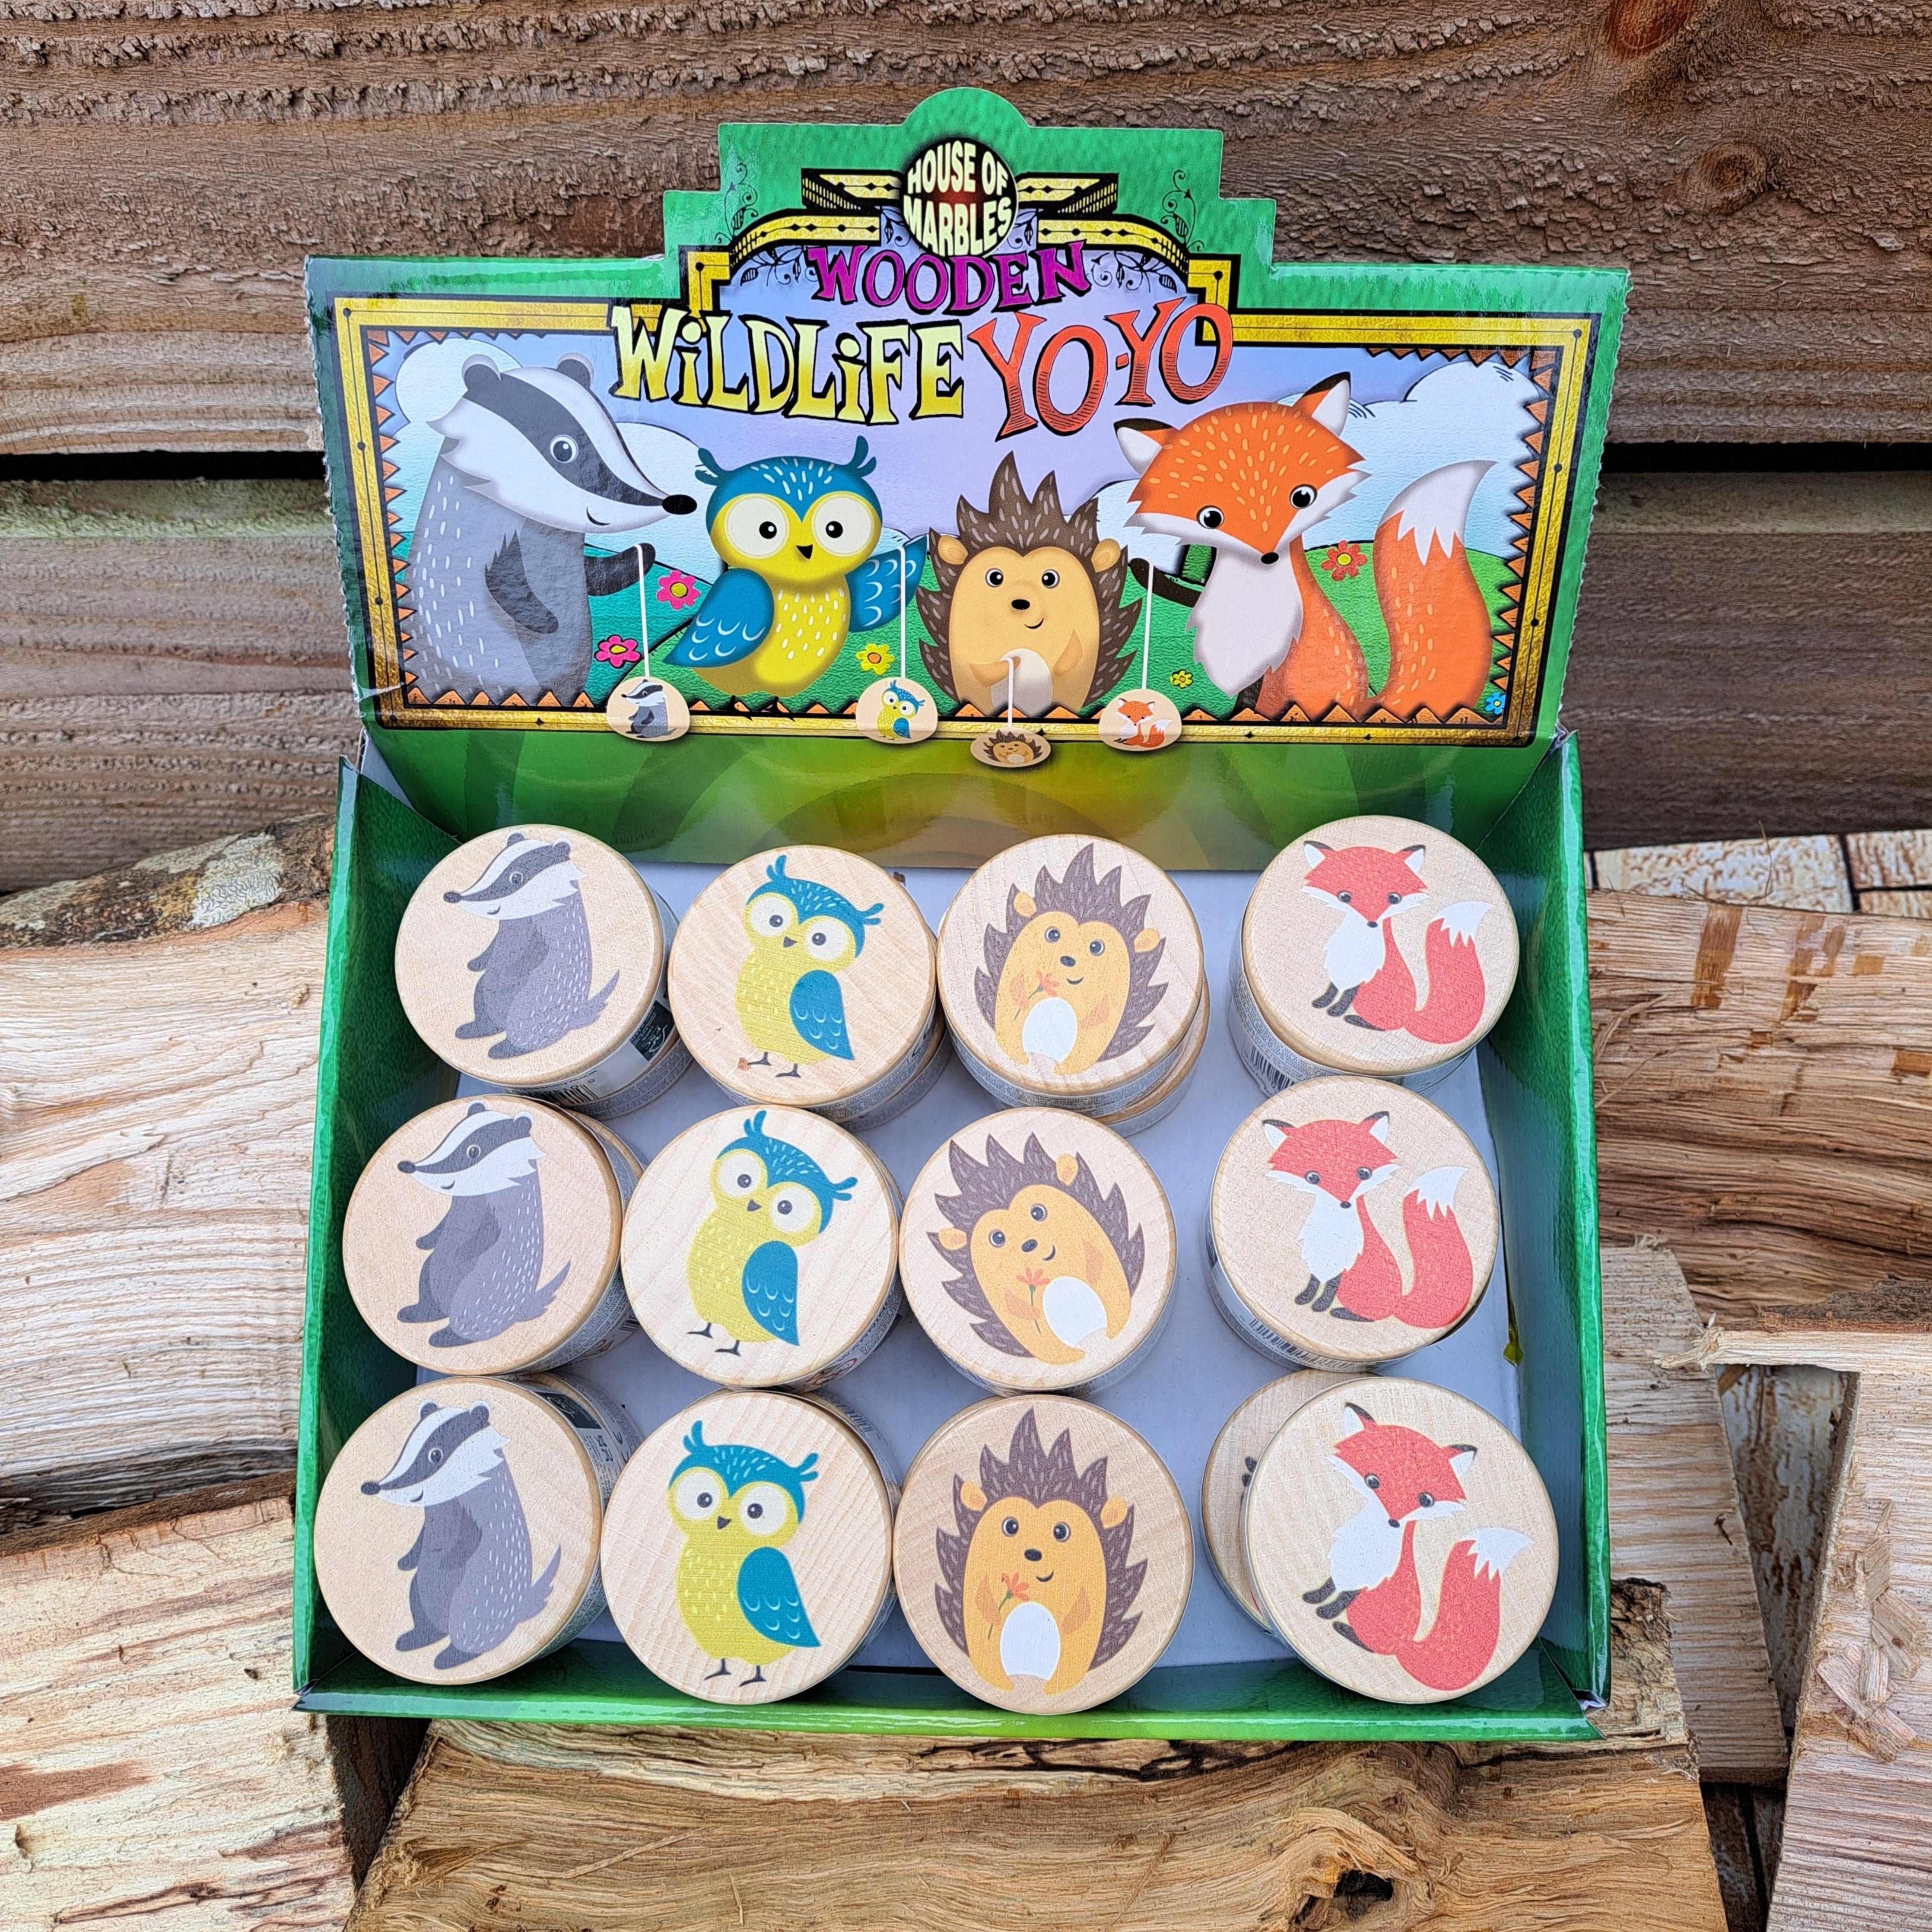 24 x Wildlife Party Bag Filler - Wooden Yoyo (Available Individually)